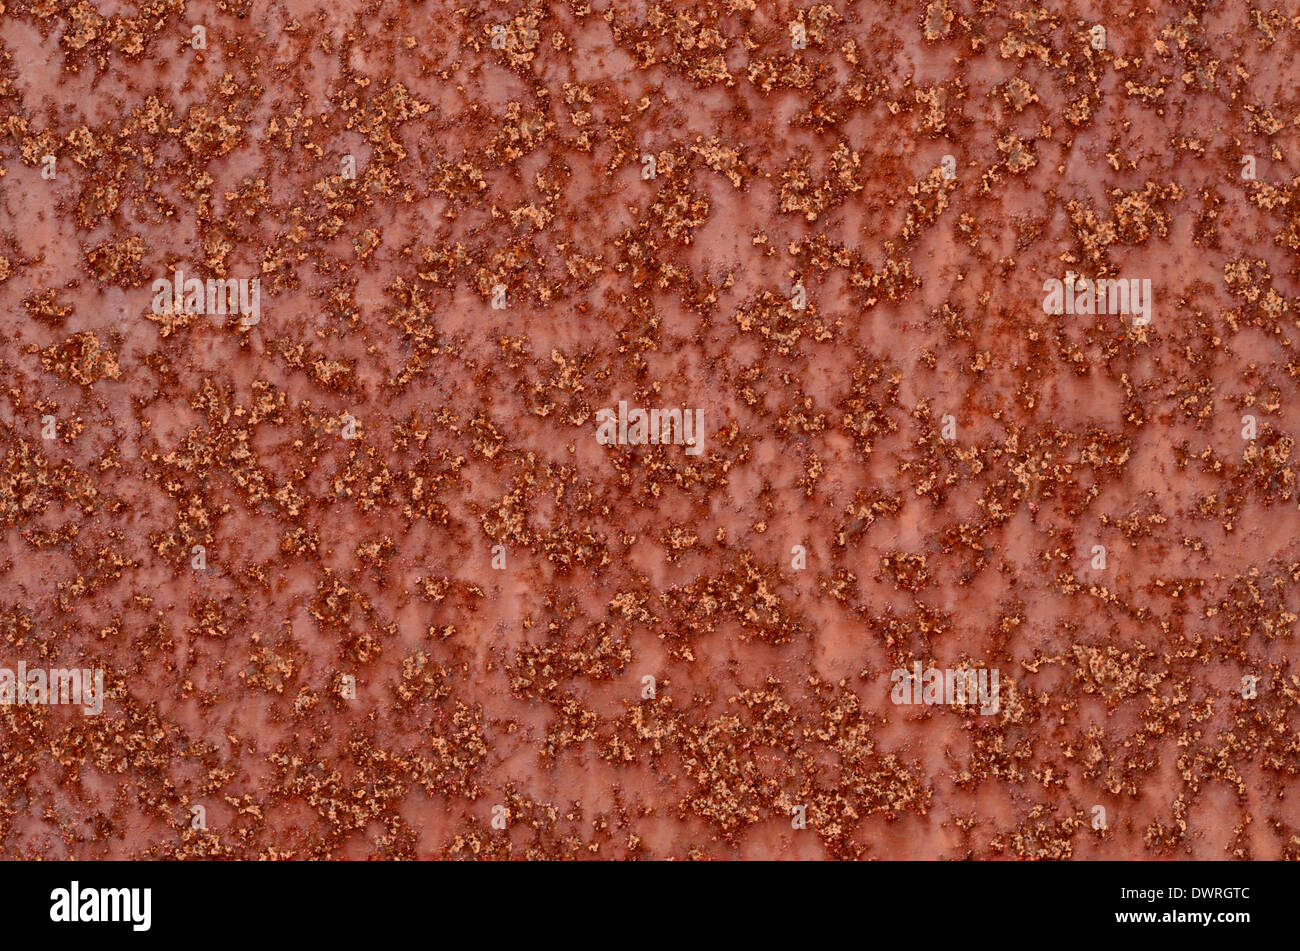 Close detail of rusting metalwork surface. Rough texture, rusty metal texture. Stock Photo